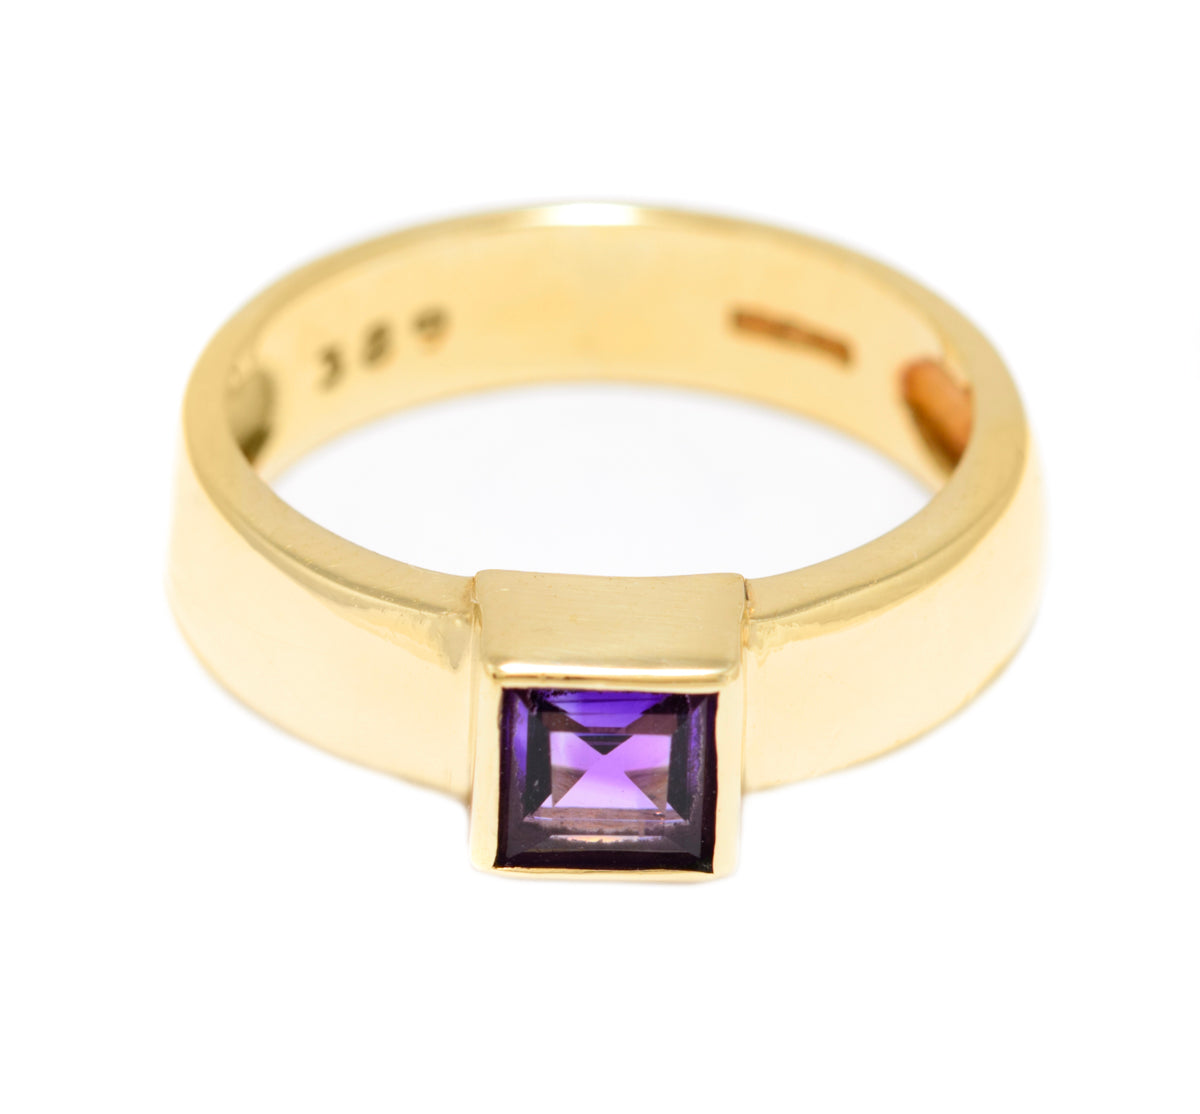 Vintage 9ct Gold & Square Cut Amethyst Gemstone Solitaire Chunky Ring (A1571)